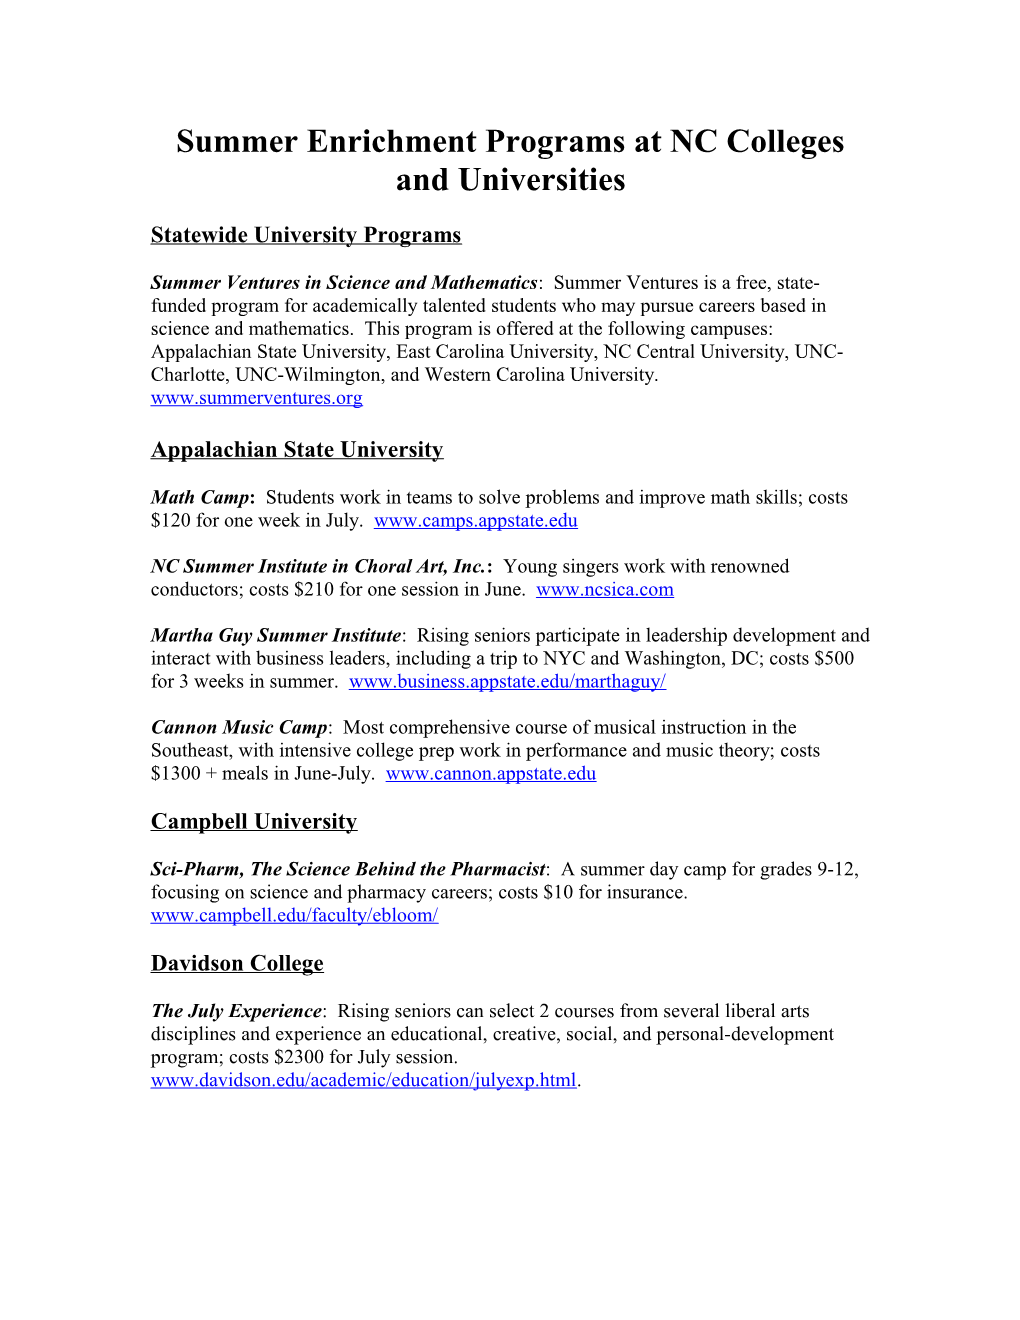 Summer Enrichment Programs at NC Colleges and Universities